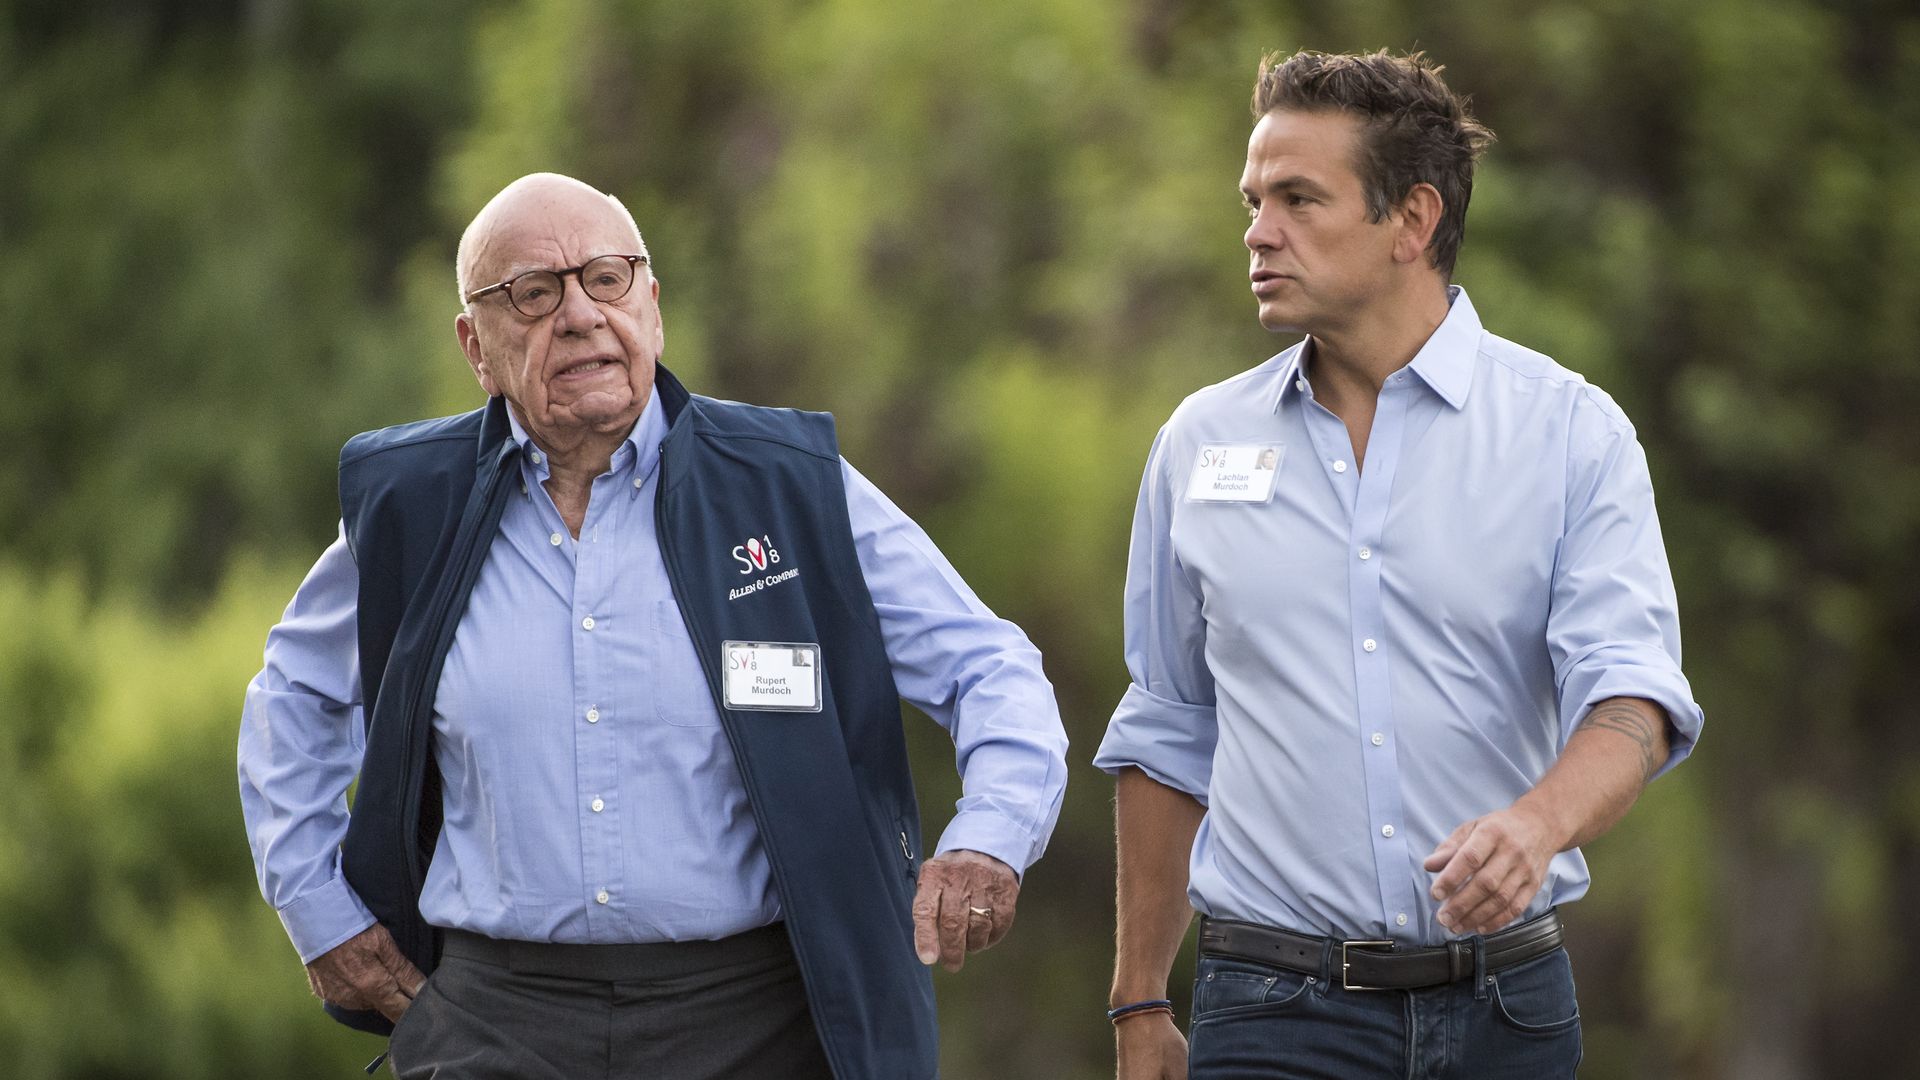 Rupert and Lachlan Murdoch talking to each other in casual clothing while walking.